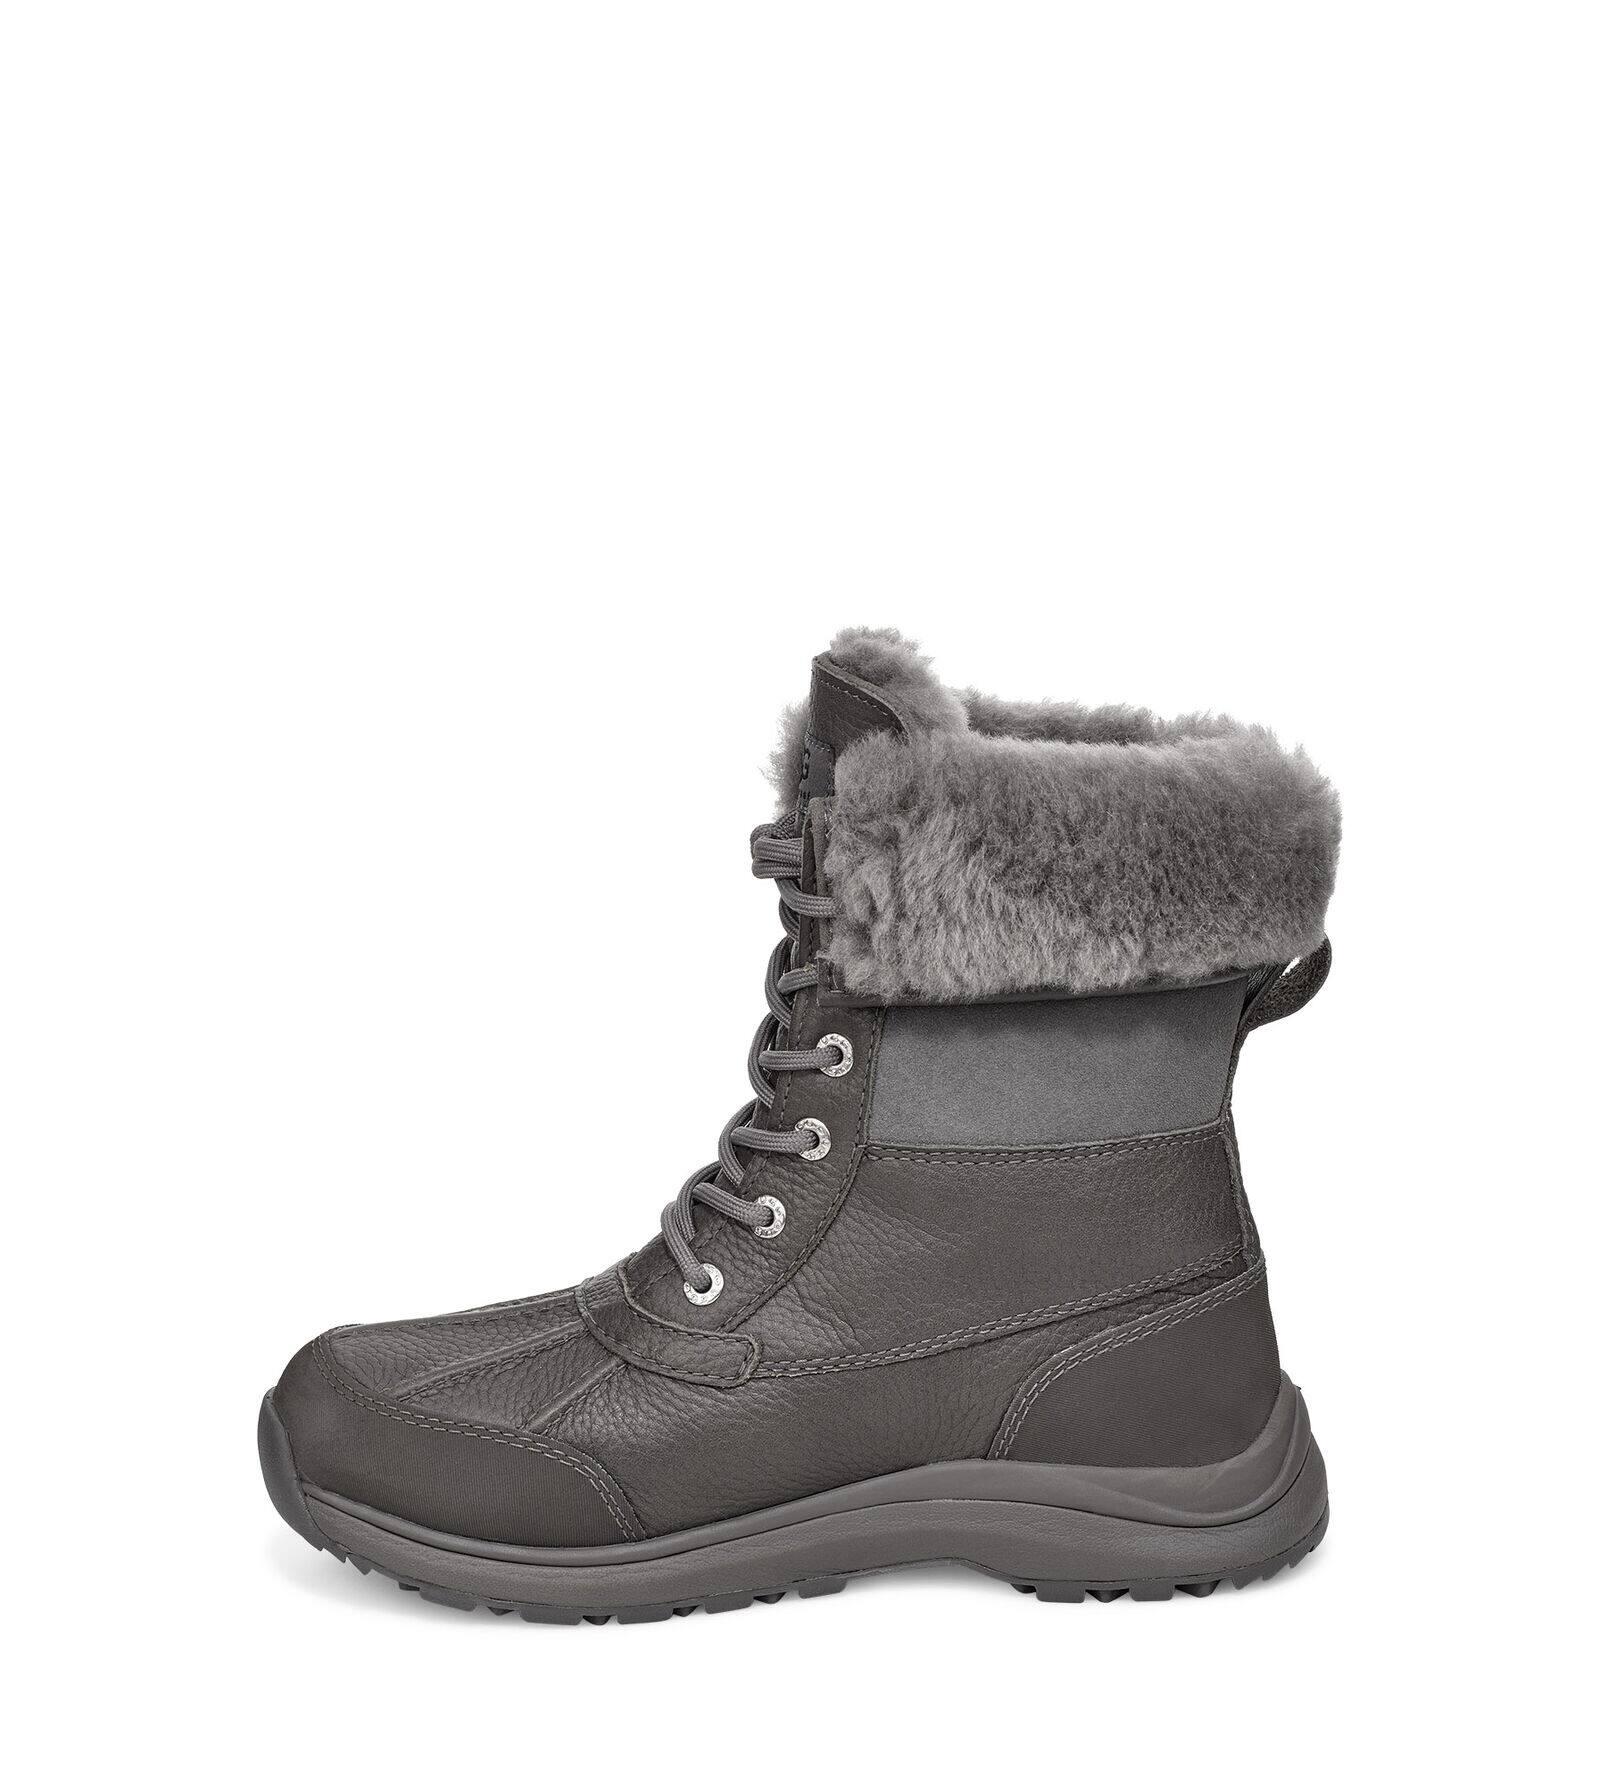 UGG Adirondack Iii Boot Leather in Charcoal (Gray) - Save 50% - Lyst